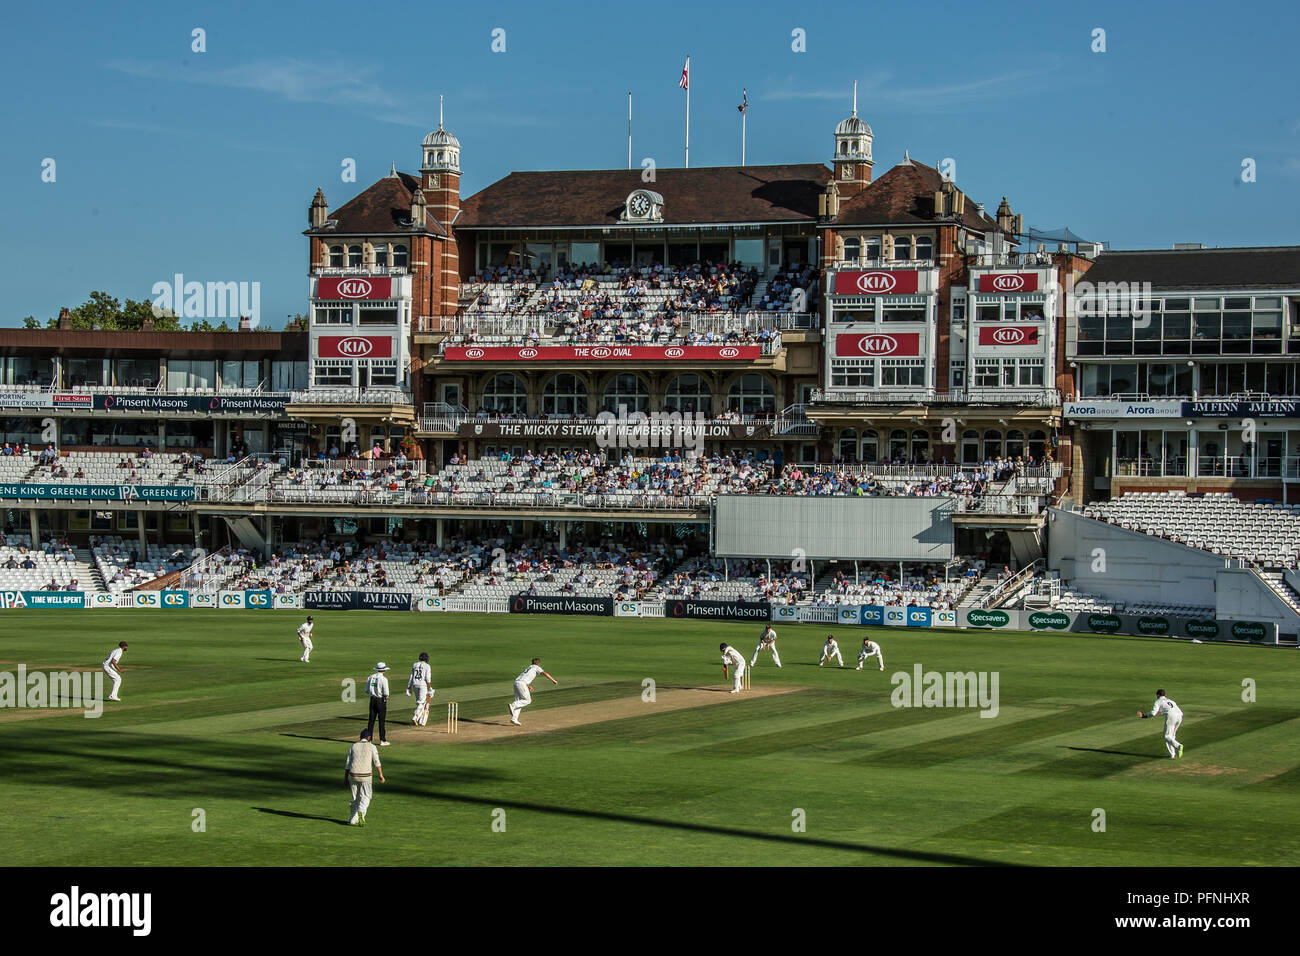 London, UK. 21 August 2018. A view of the Oval with the Micky Stewart members pavilion in the background on a sunny afternoon as Surrey take on Lancashire on day three of the Specsavers County Championship day/night game at the Oval with a pink ball. David Rowe/Alamy Live News Stock Photo